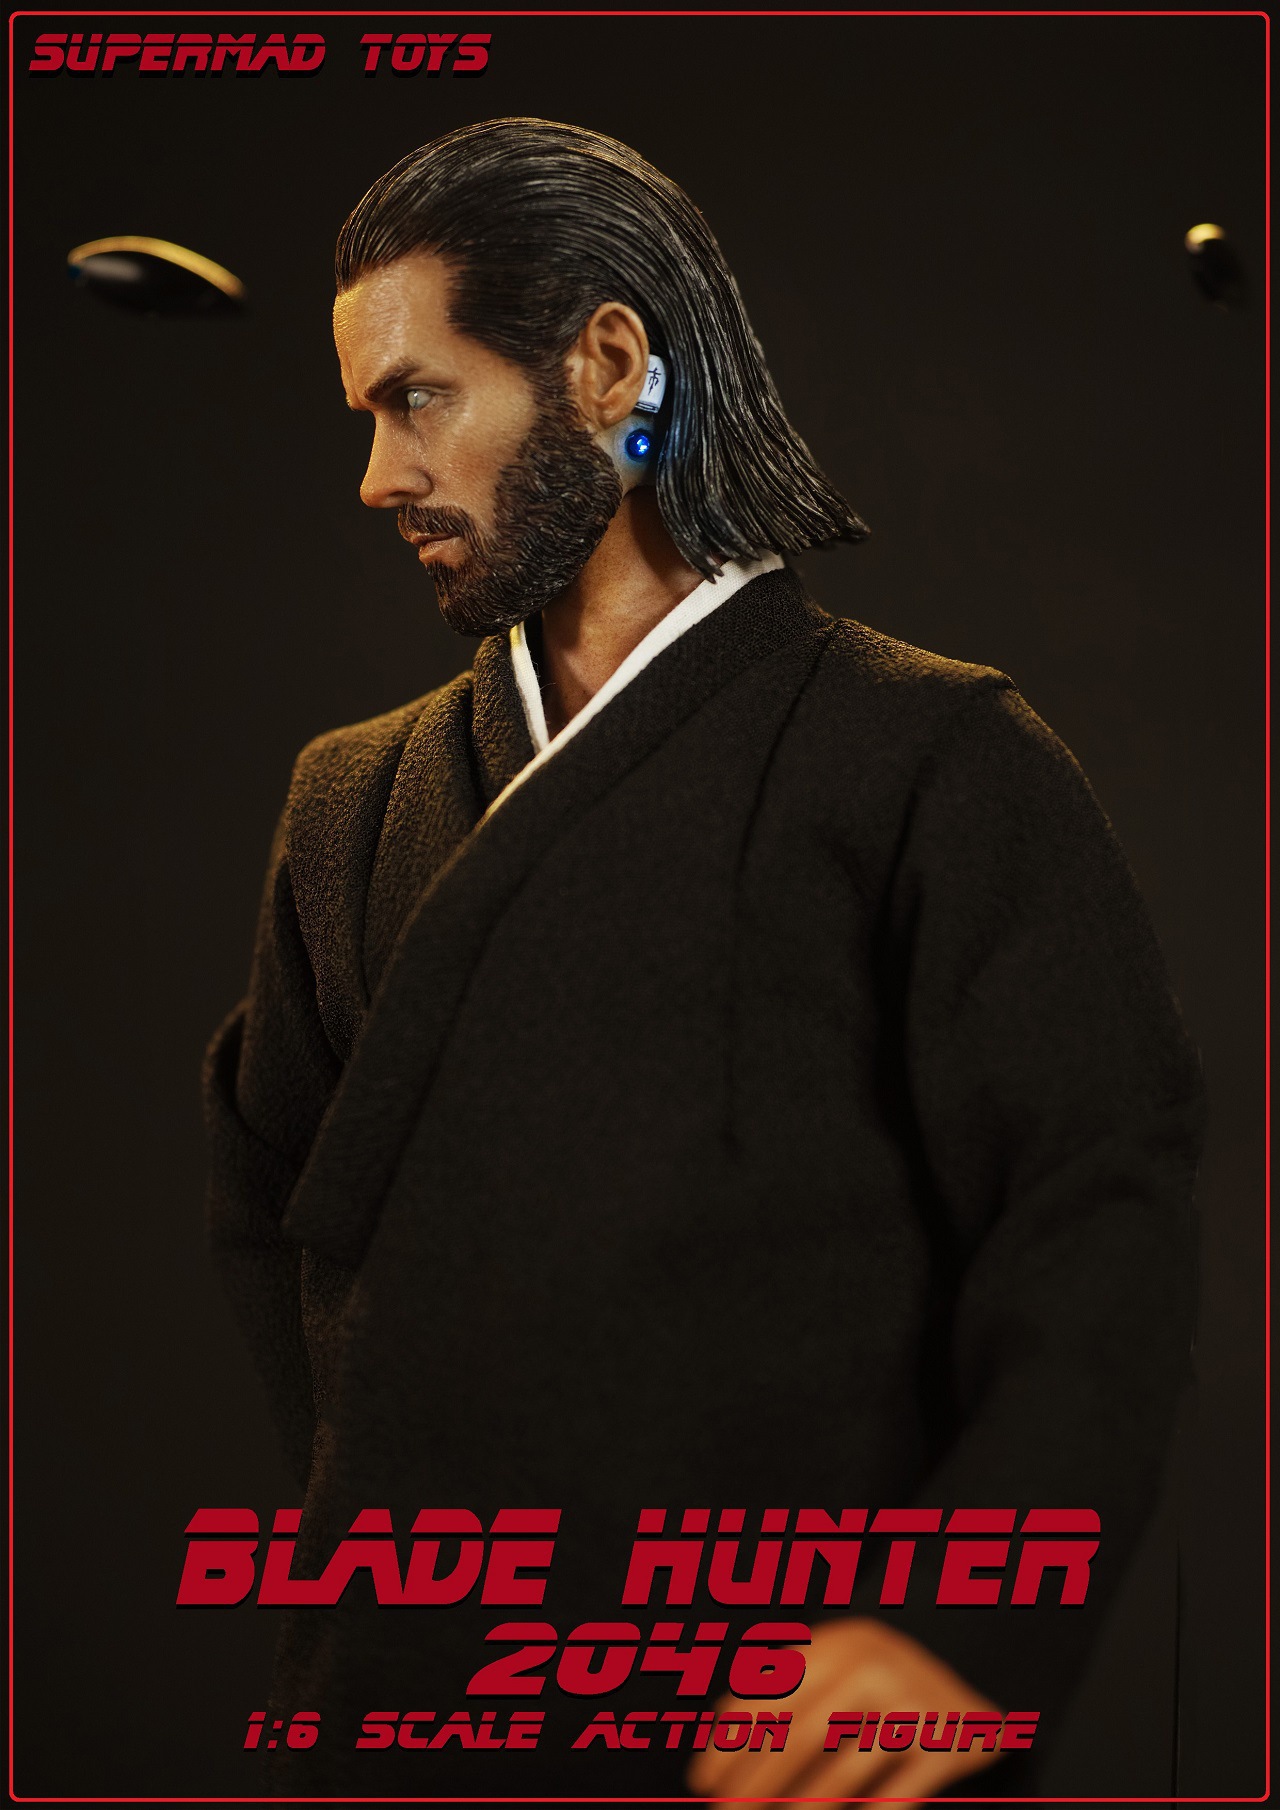 Supermad Toys: Niander Wallace (Blade Runner 2049)